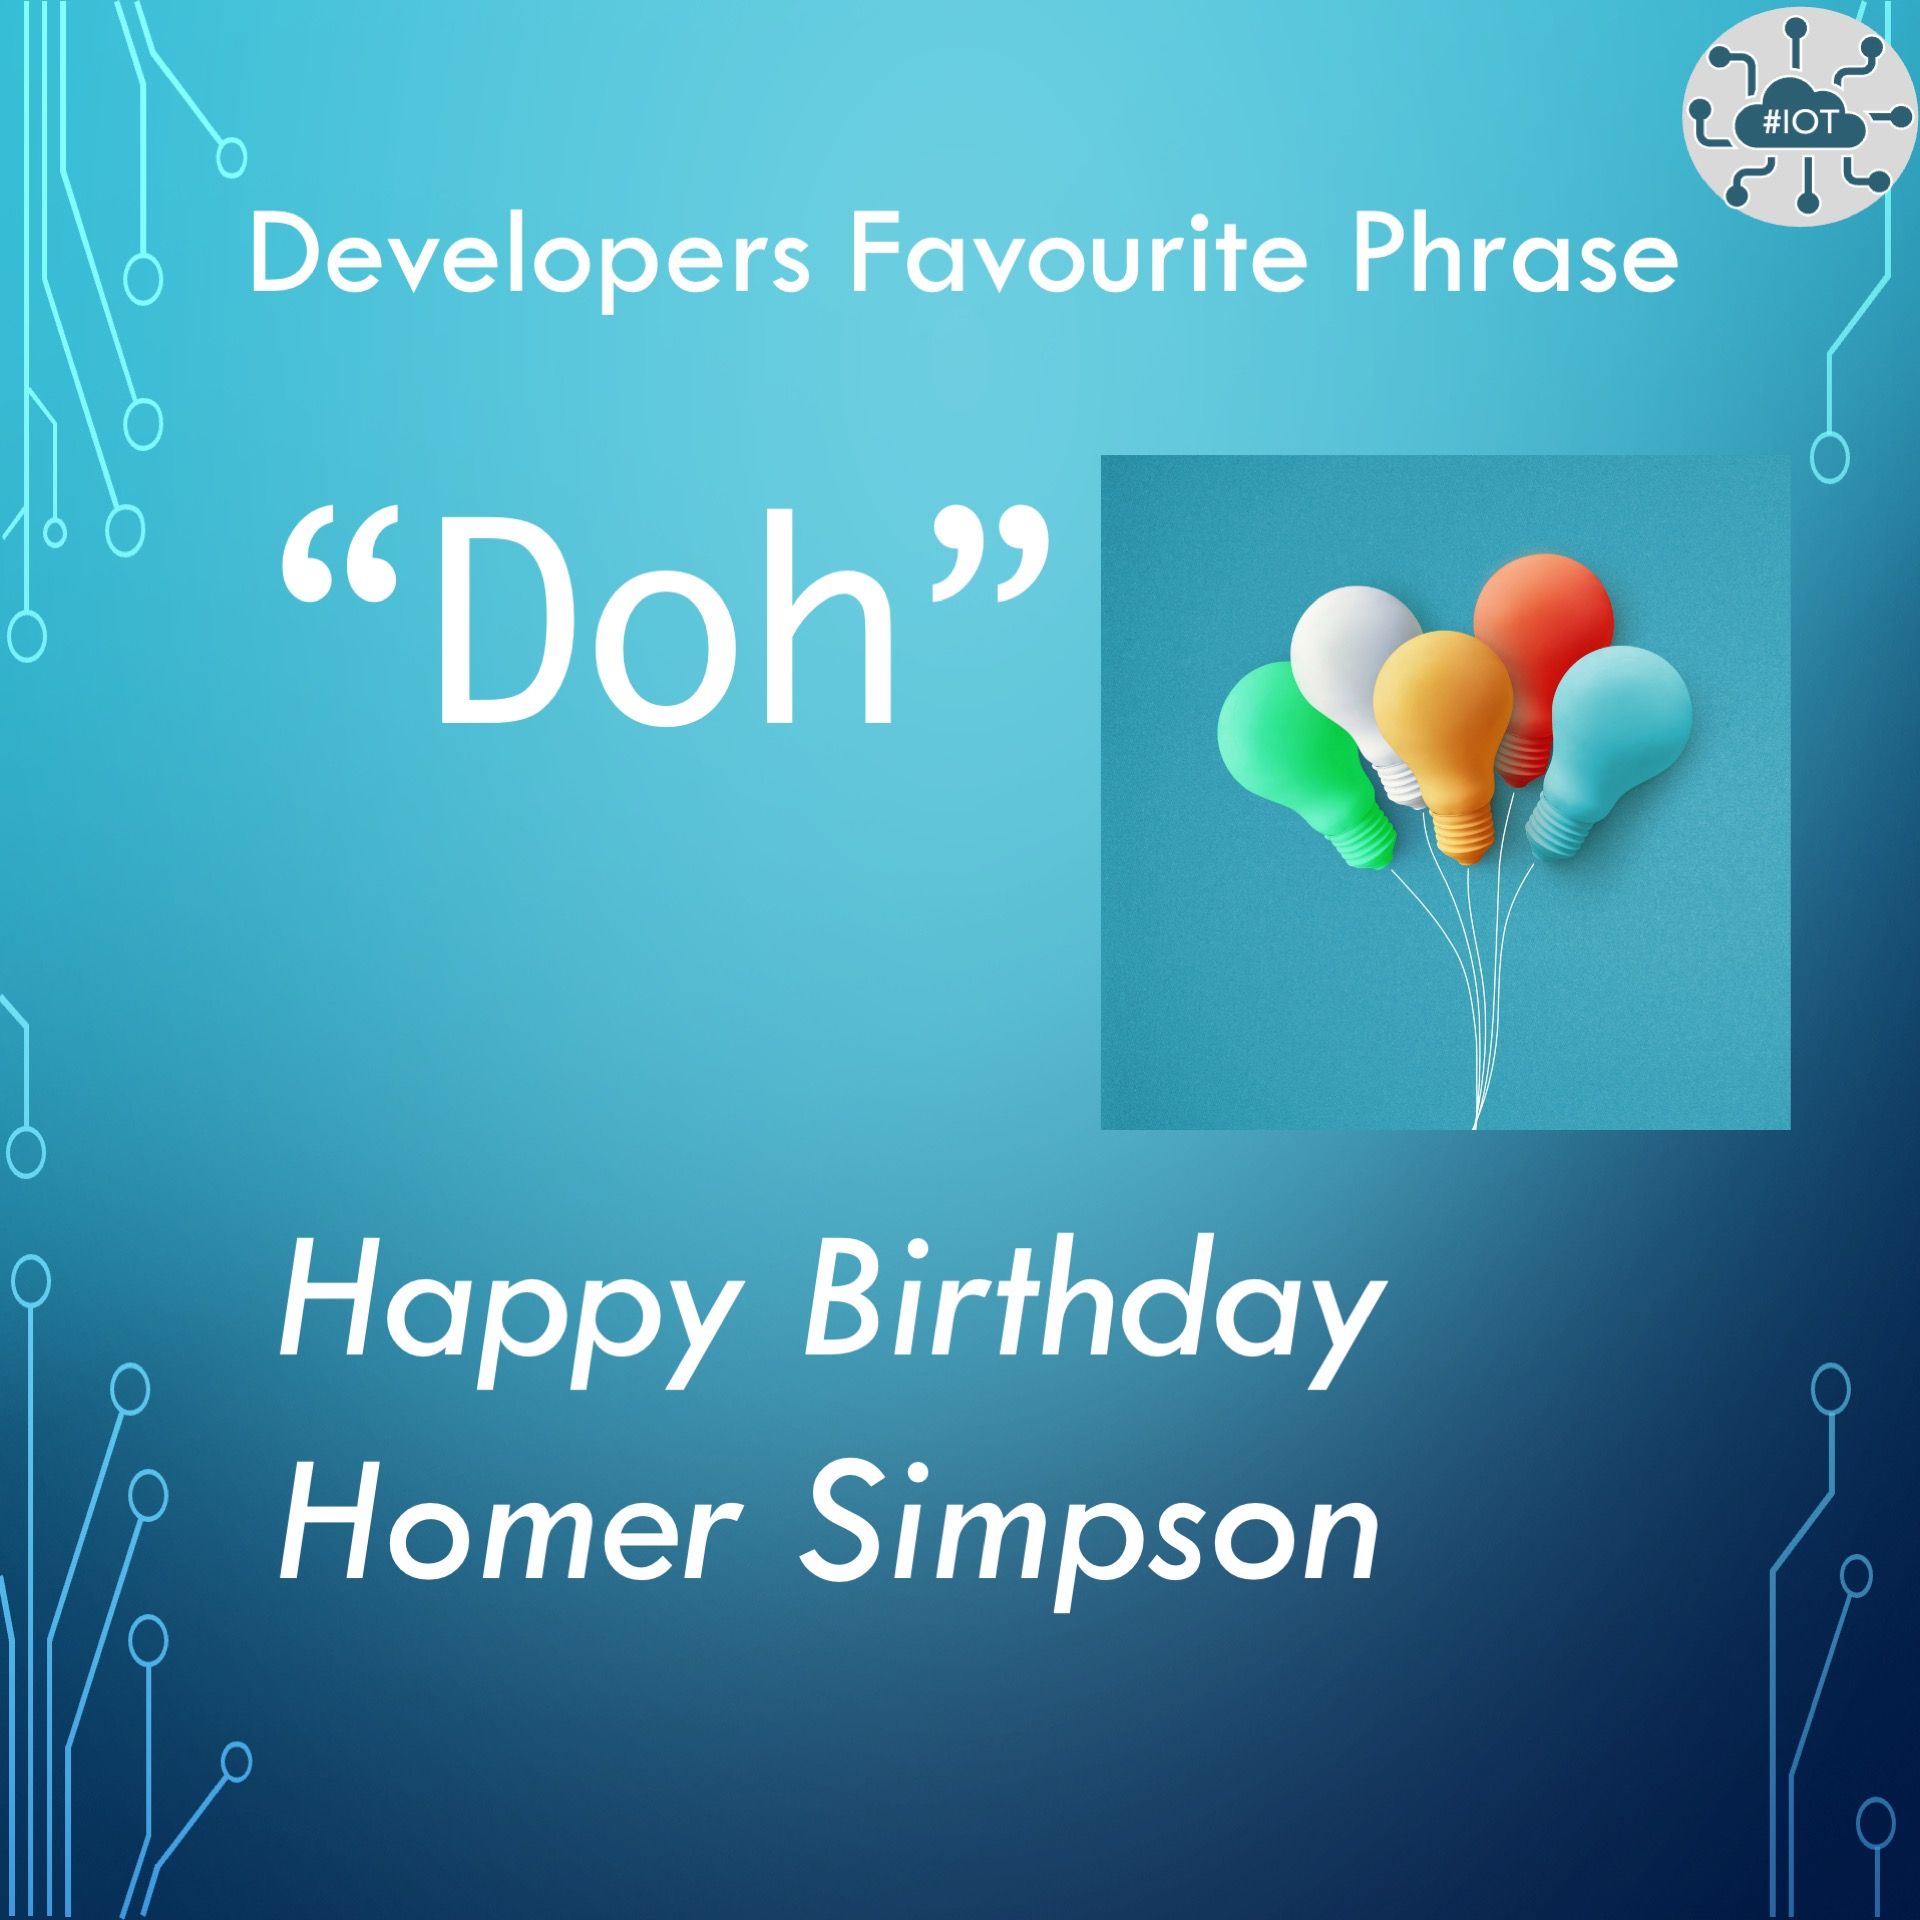 Happy Birthday Homer Simpson.
What would I do without the phrase Doh     